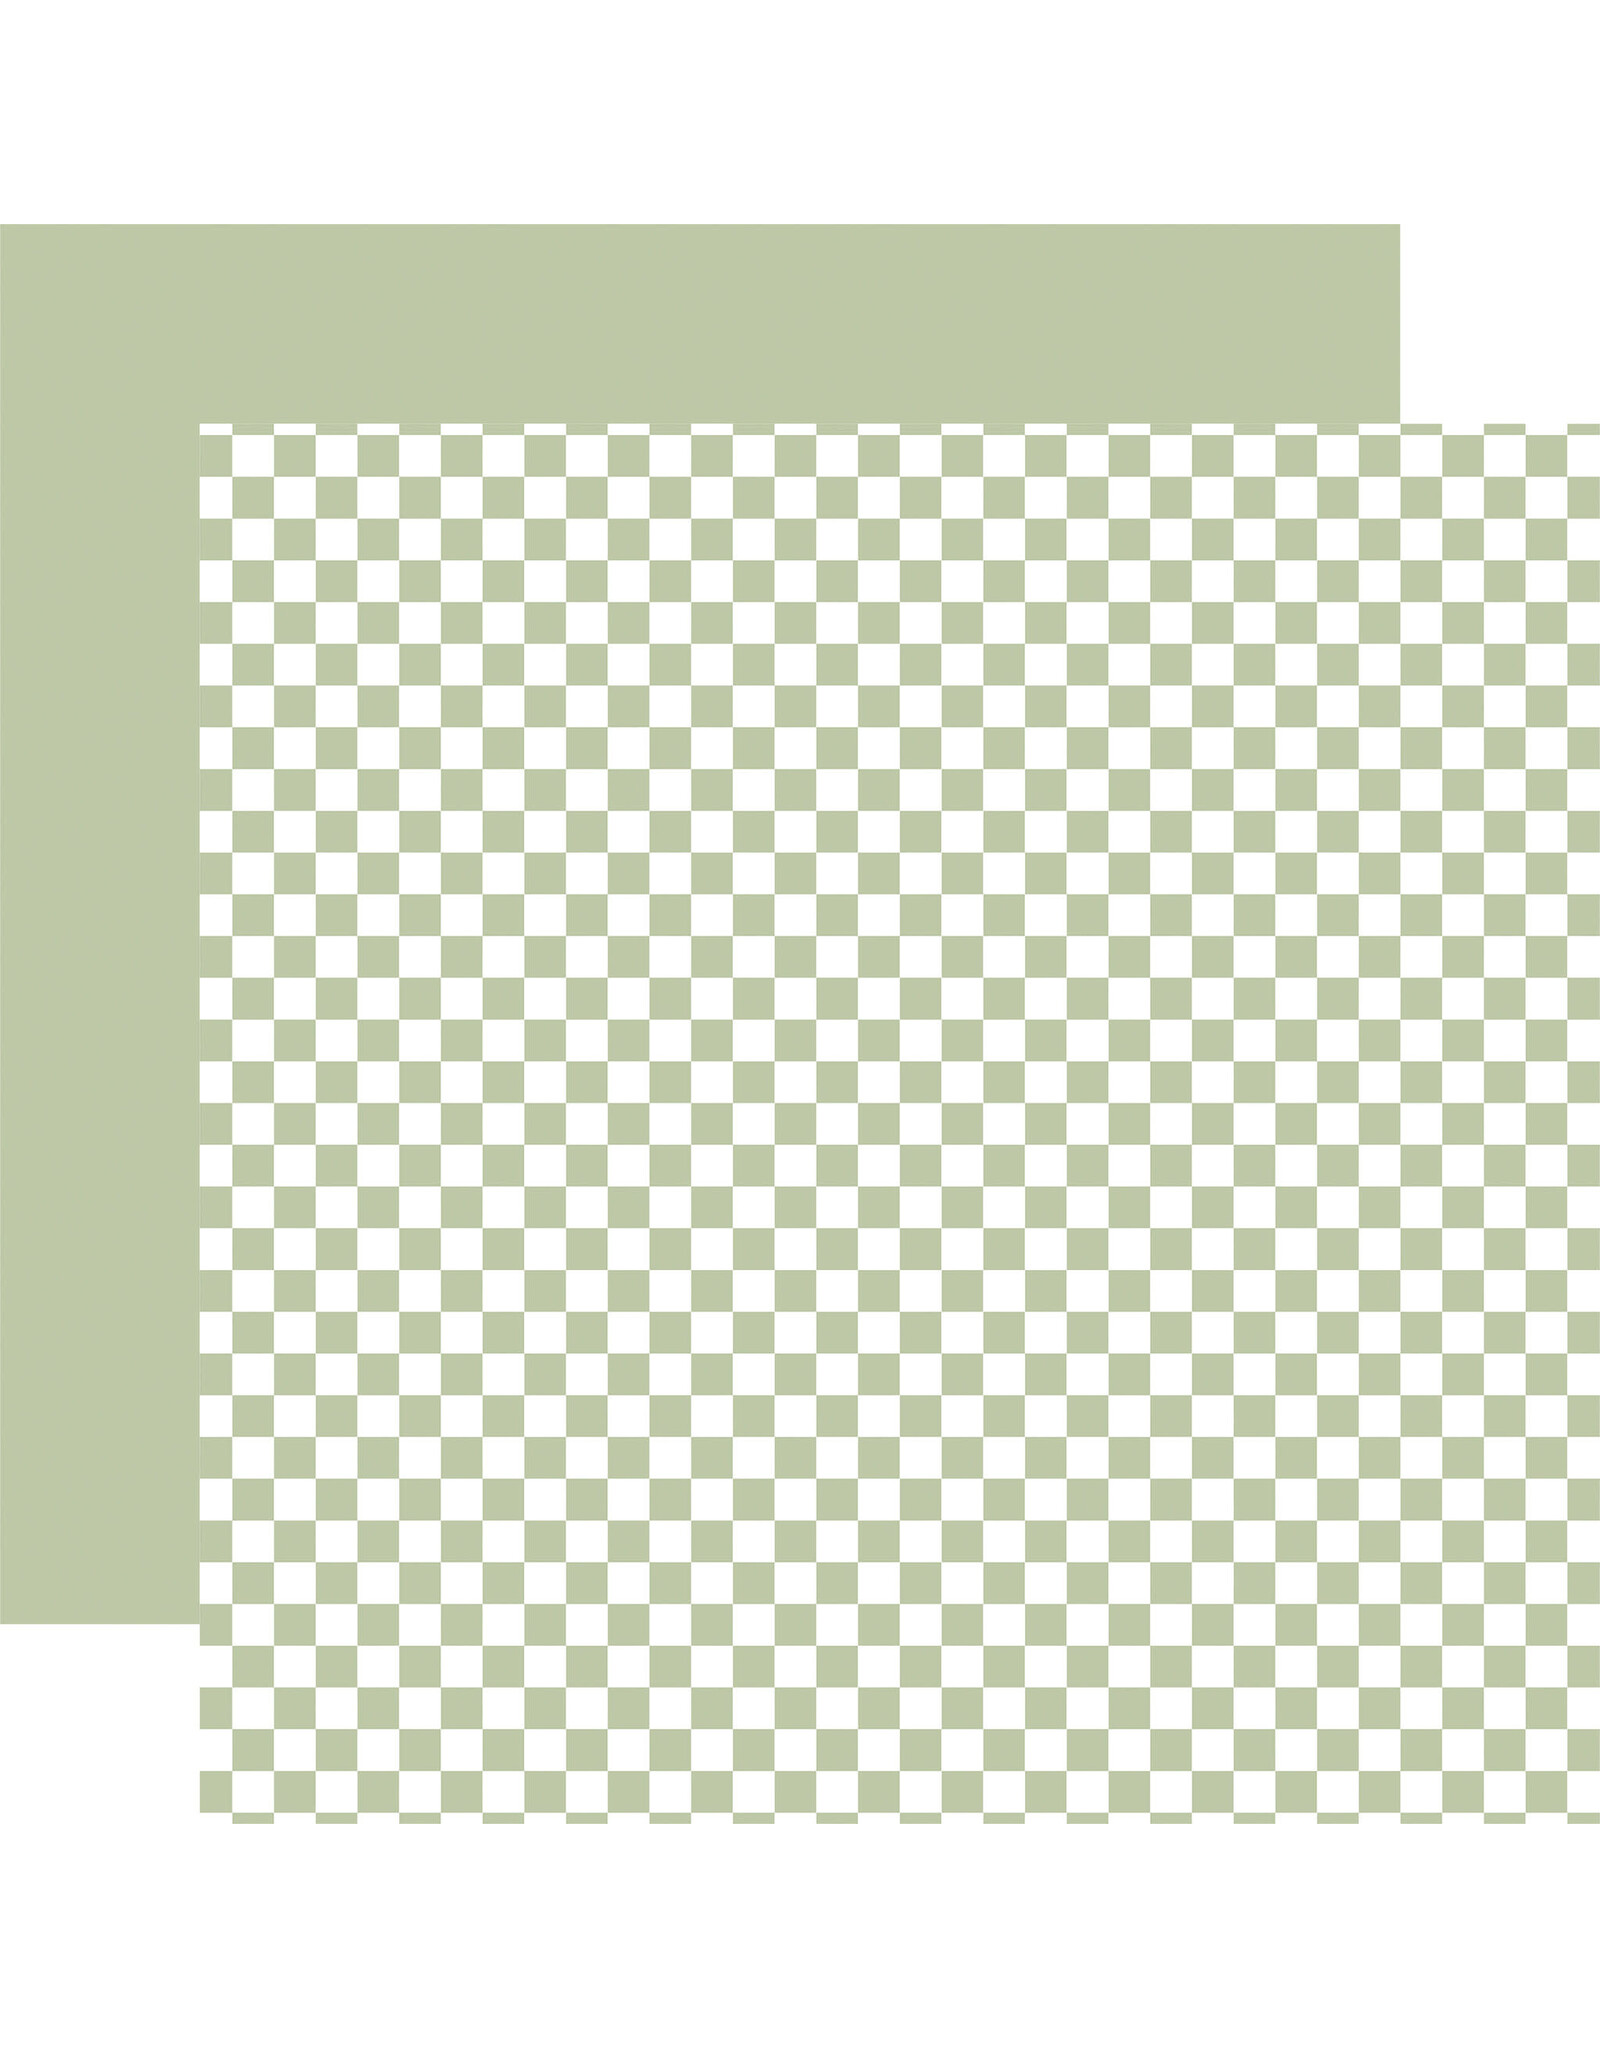 Echo Park Checkerboard: Celery 12x12 Patterned Paper